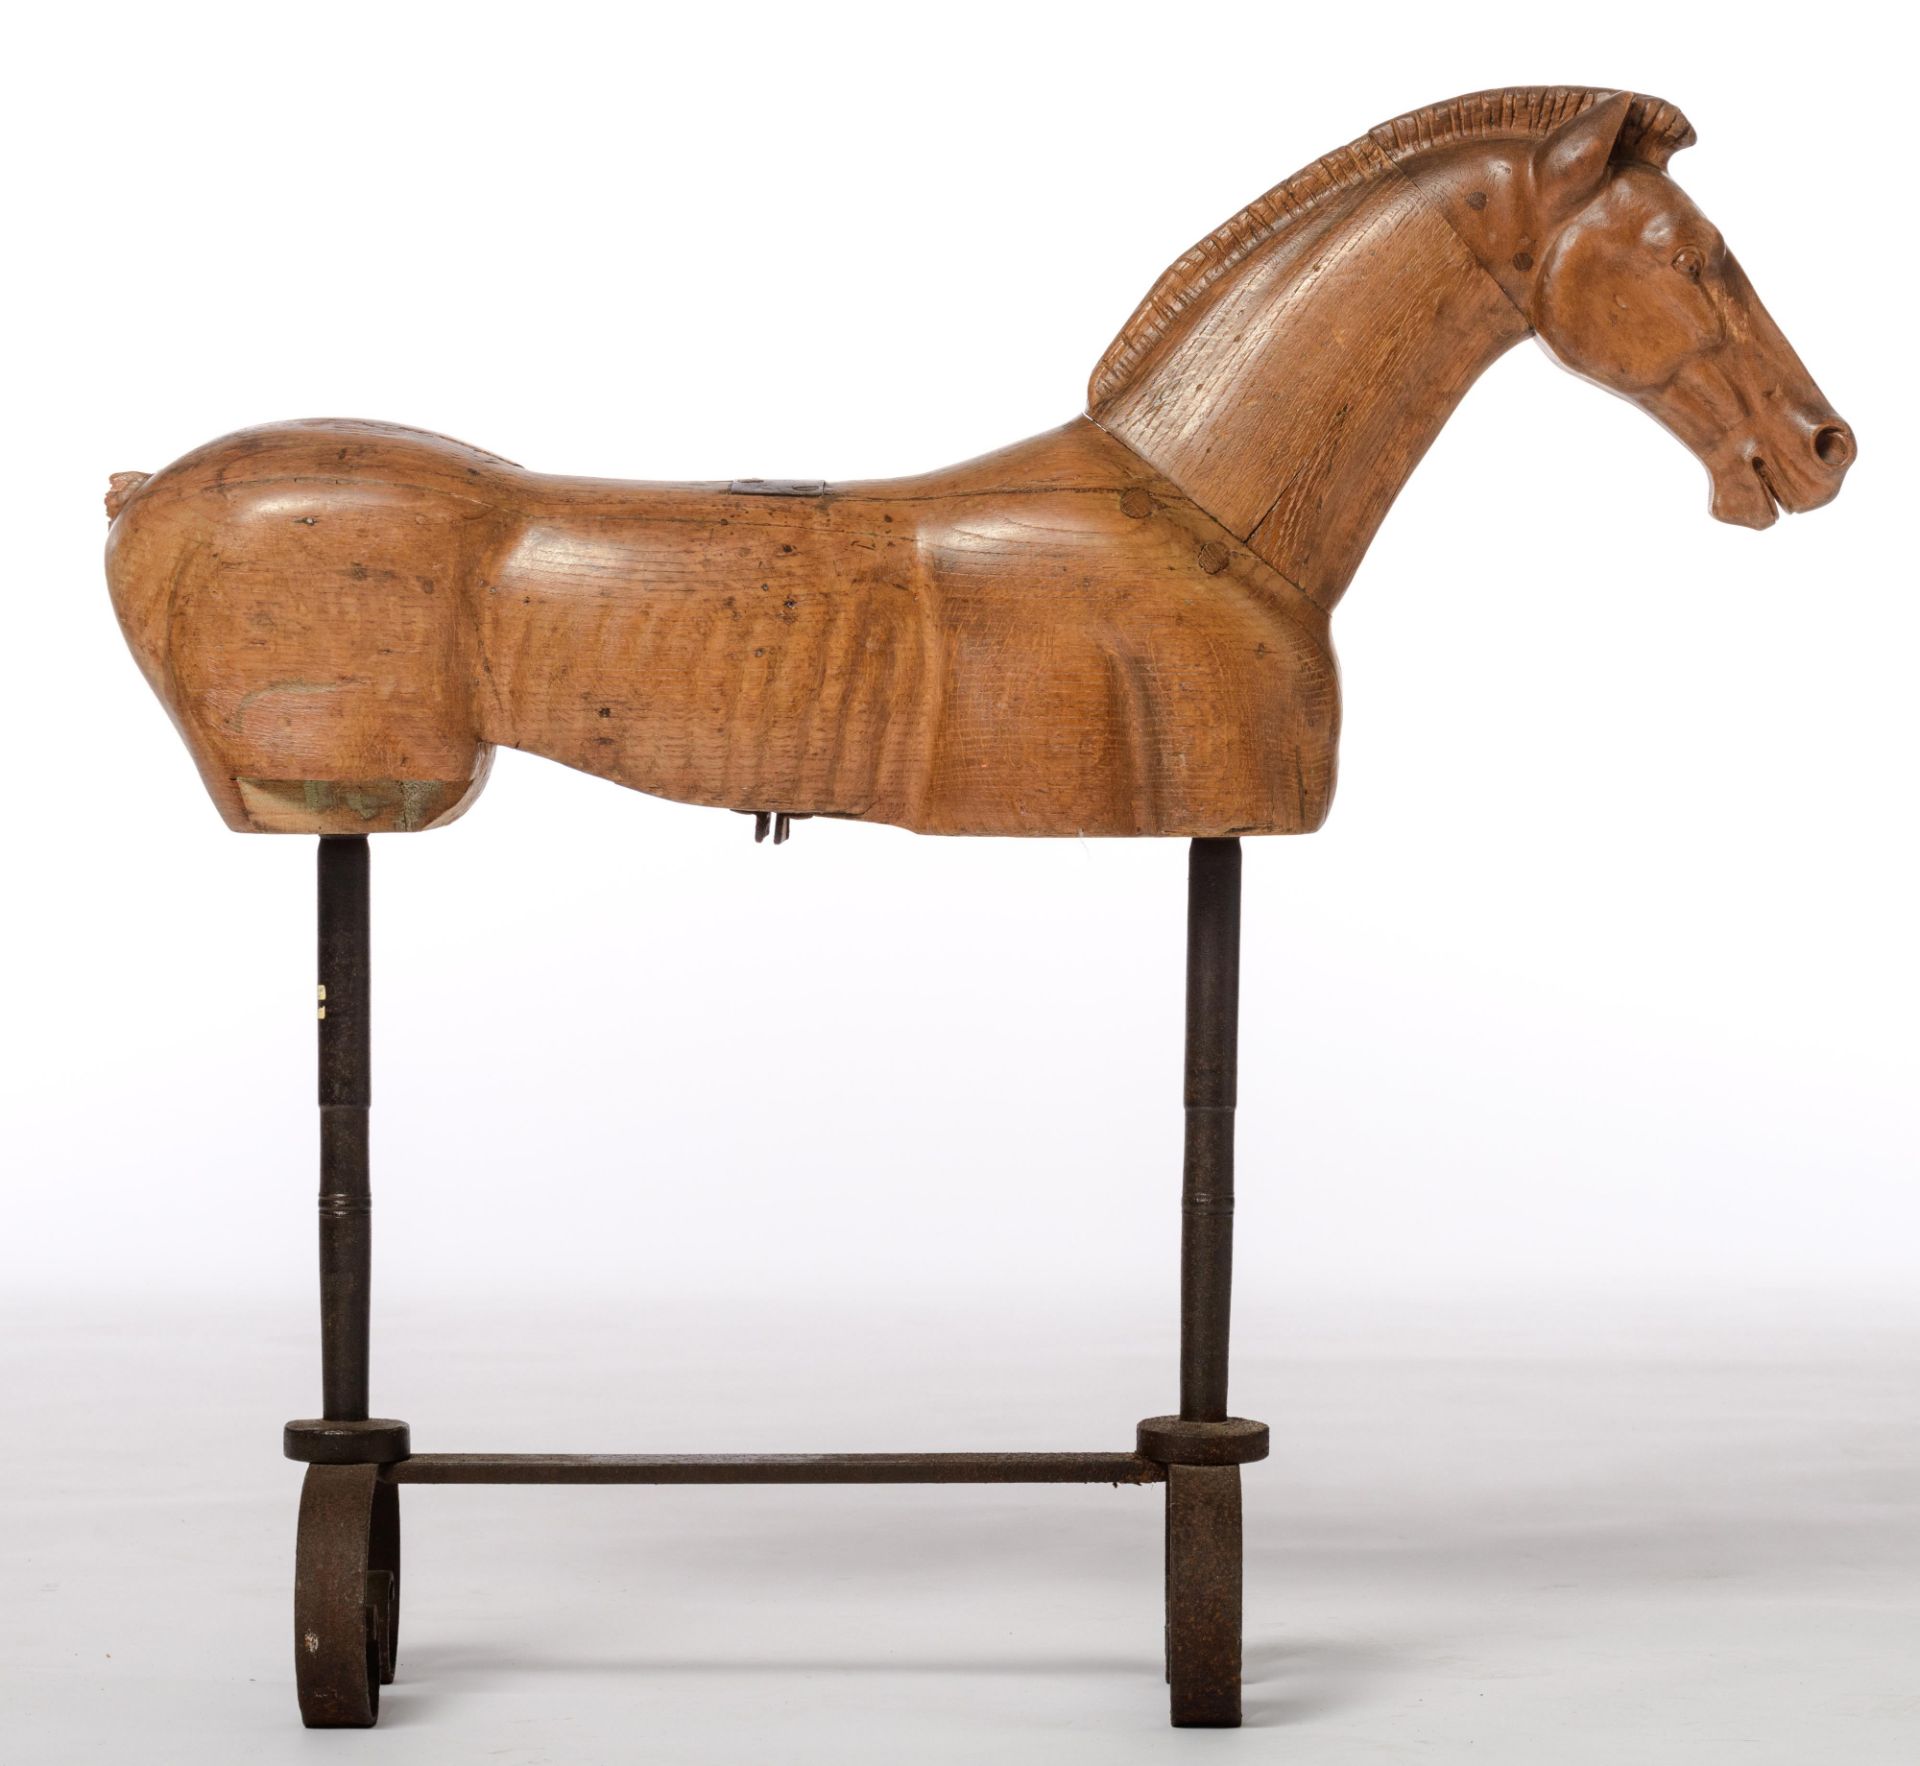 A carved oak horse on a wrought iron stand, H 92 - W 97 cm - Image 5 of 11